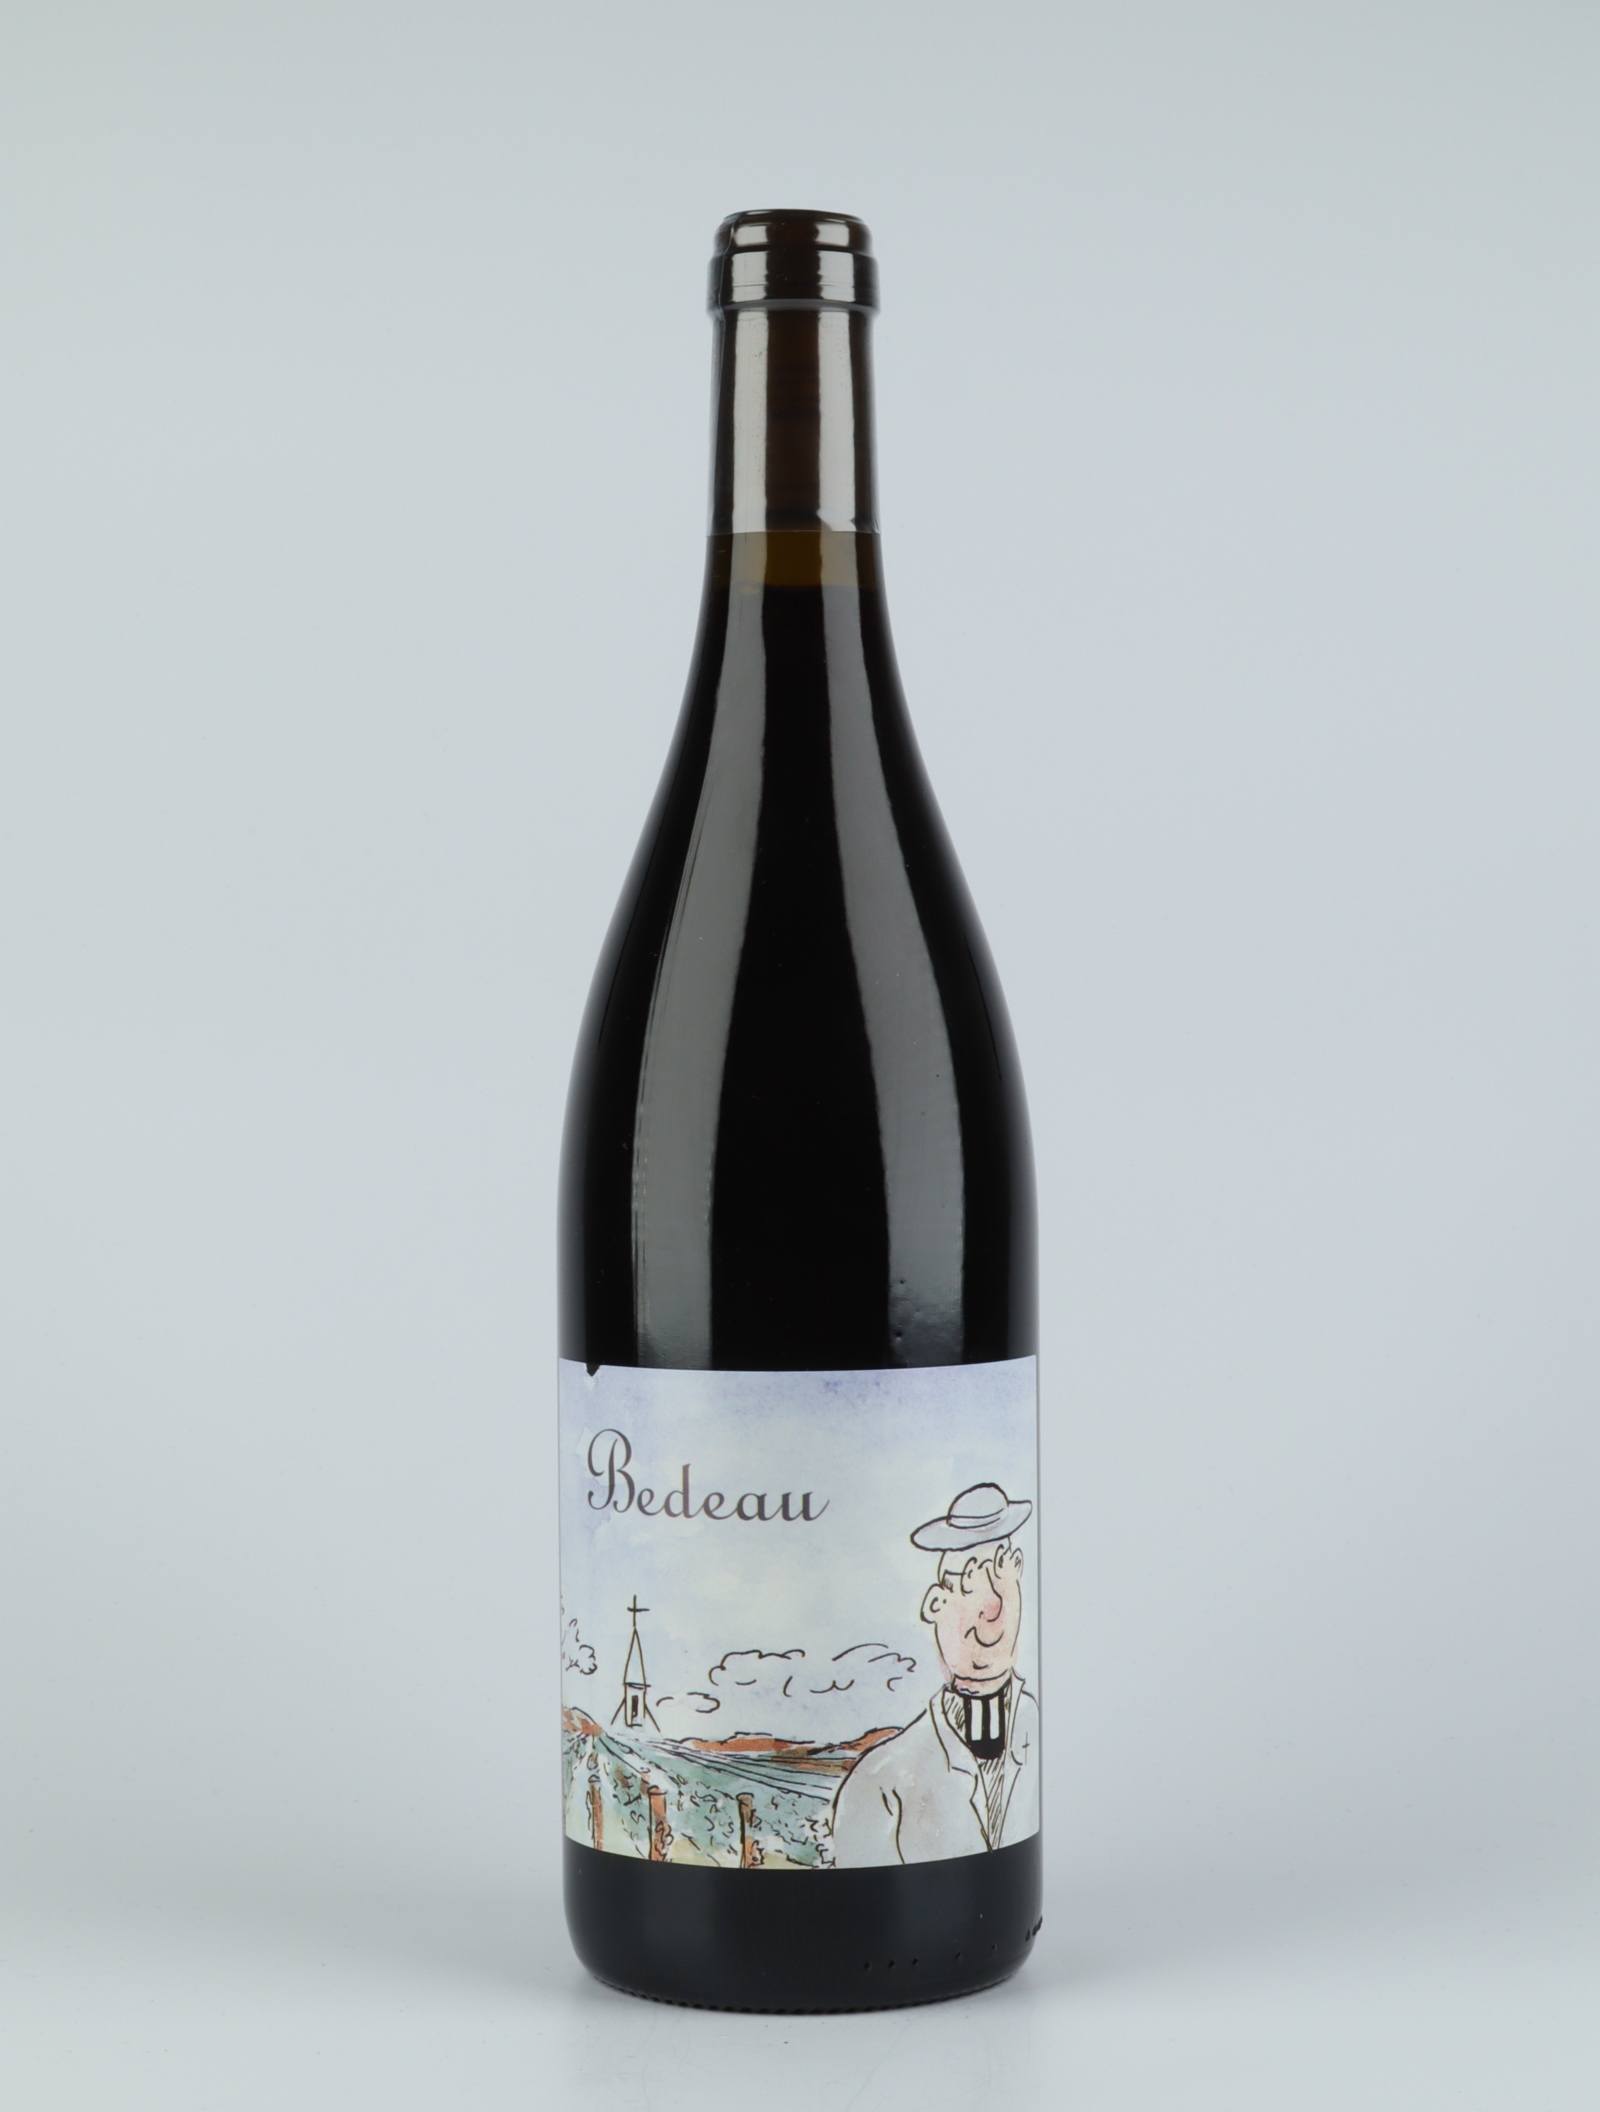 A bottle 2018 Bourgogne Rouge - Bedeau Red wine from Frédéric Cossard, Burgundy in France